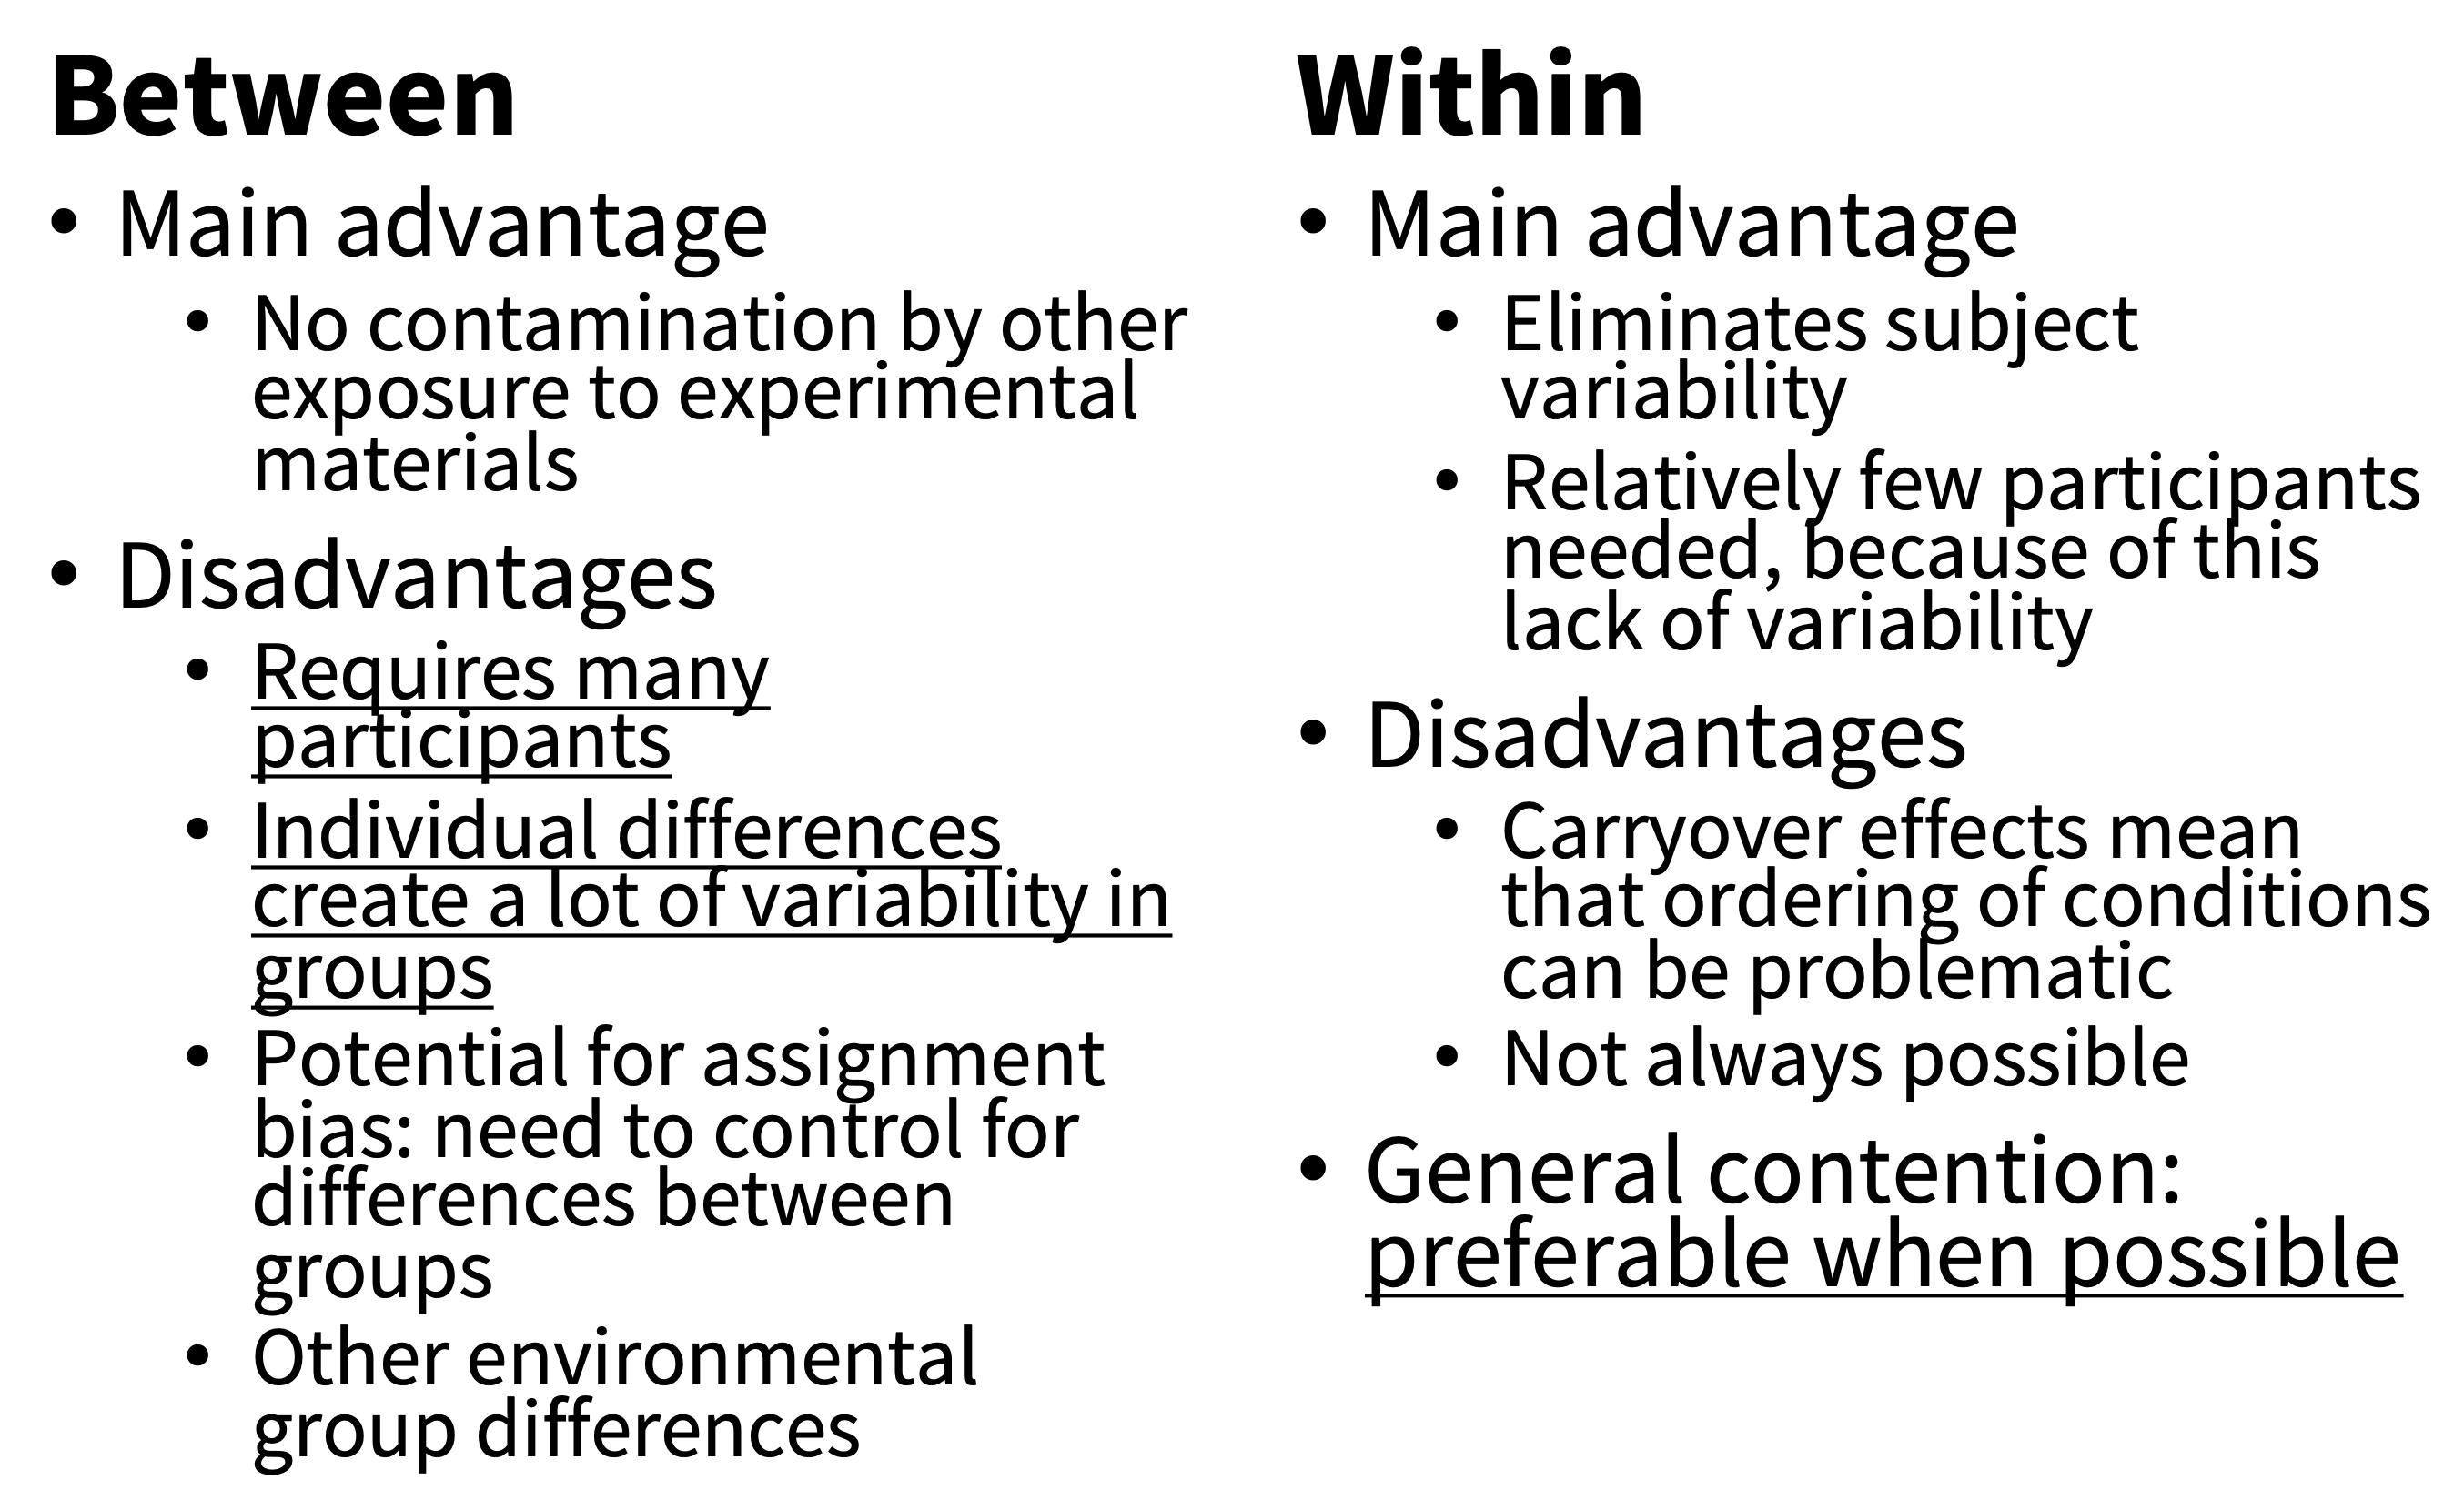 Pros and cons of between- vs. within-participant designs. We recommend within-participant designs when possible.